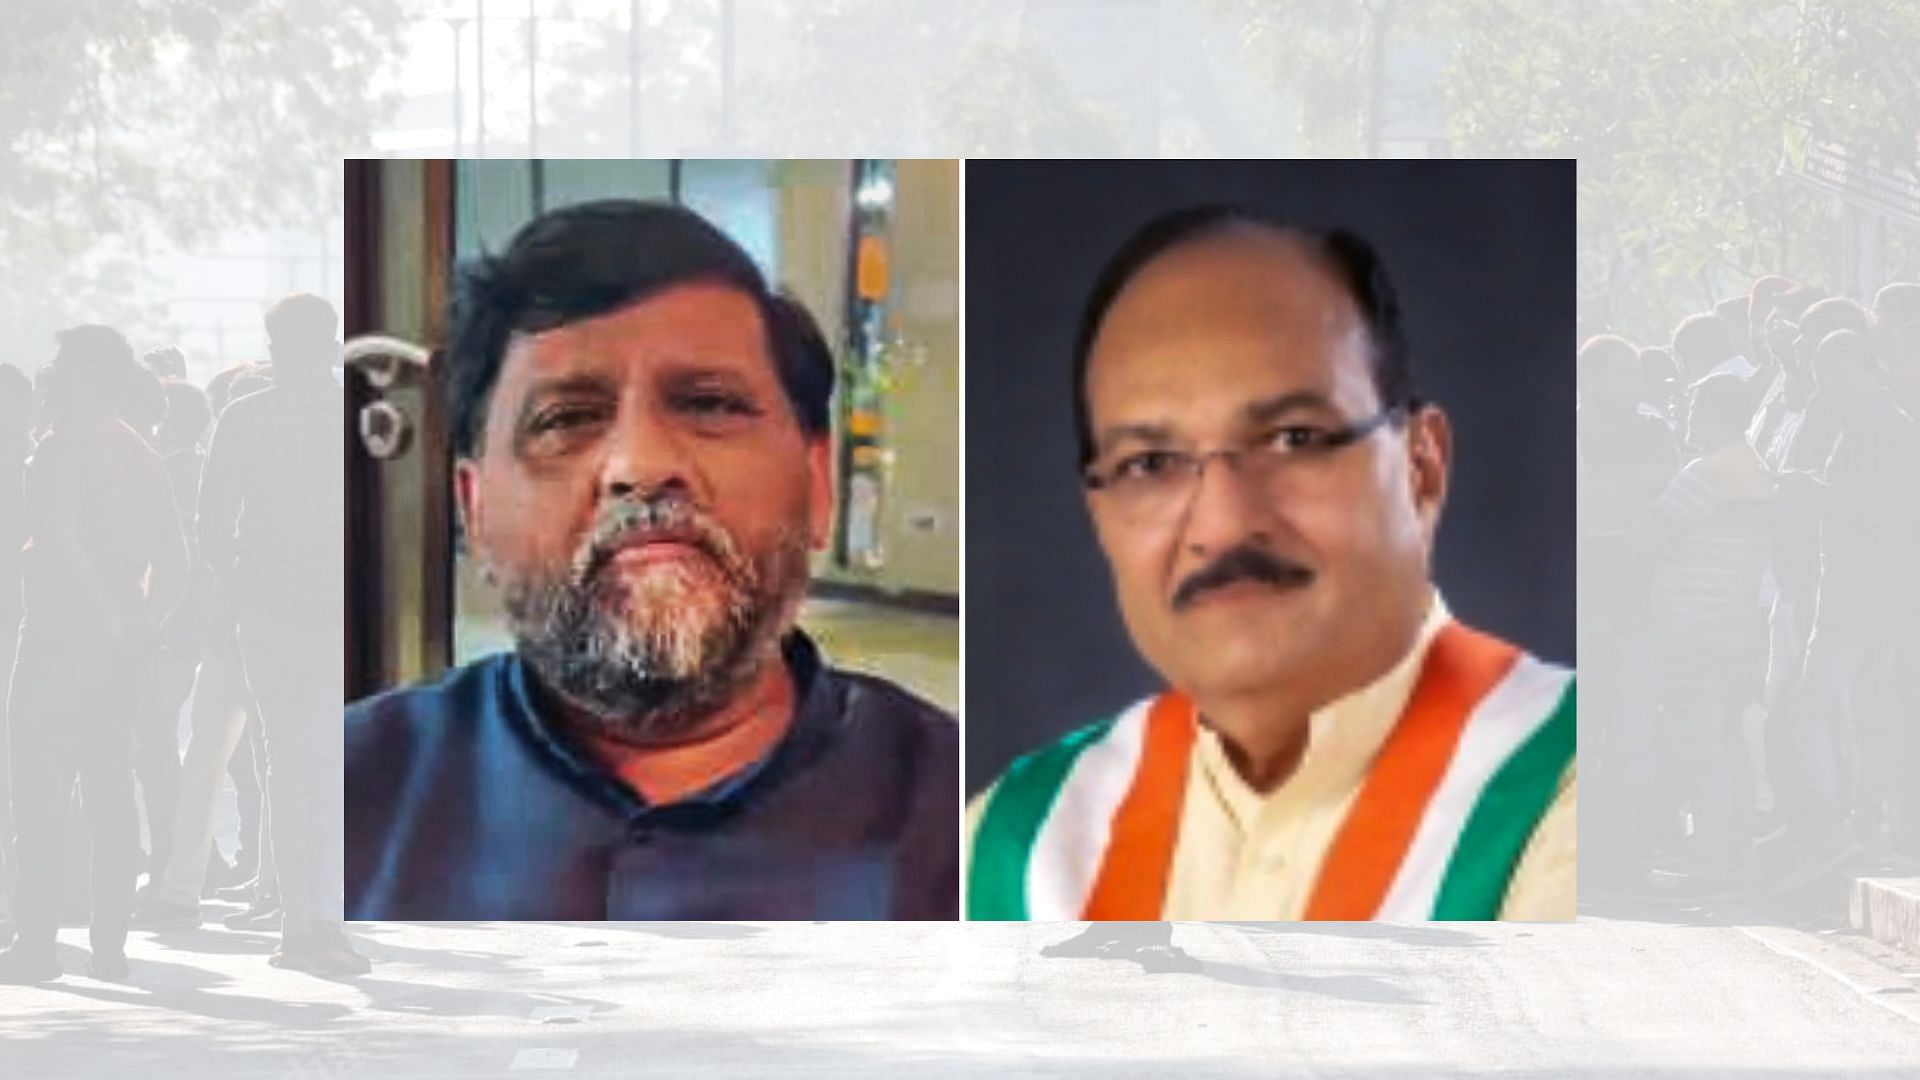 BJP's Kantilal Amrutiya and Congress' Jayantilal Patel are contesting from Morbi seat for Gujarat Assembly elections